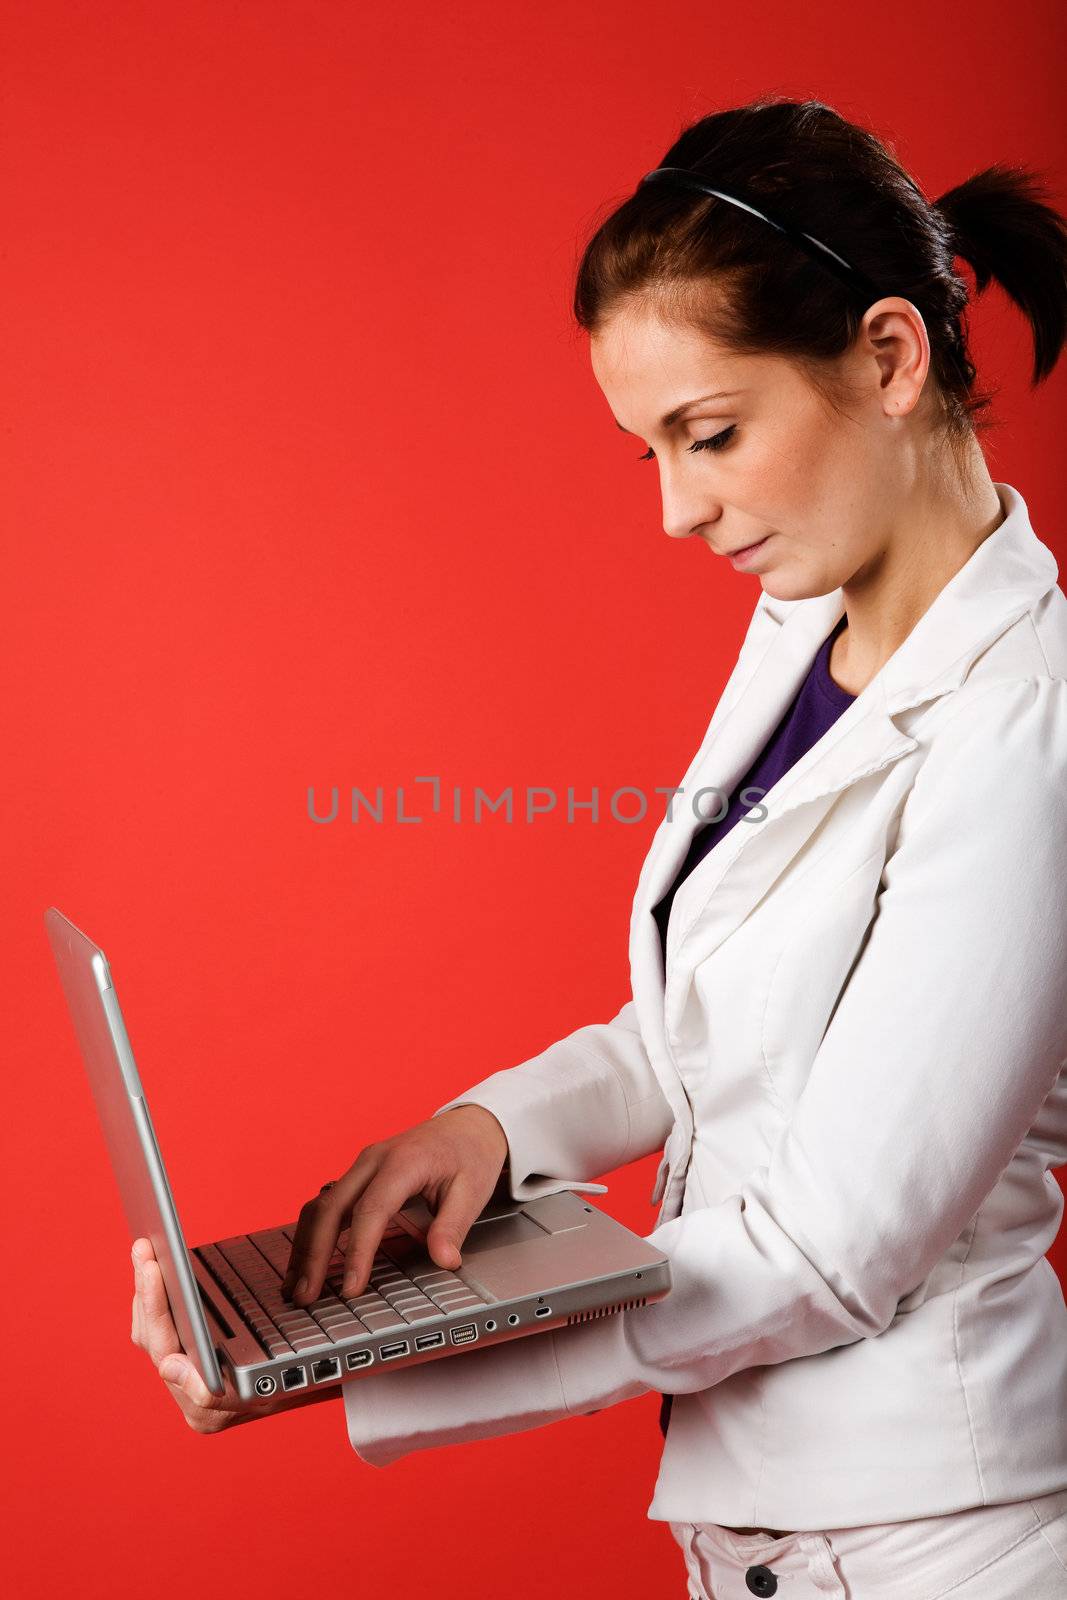 A young business woman or student using a laptop with a strong red background